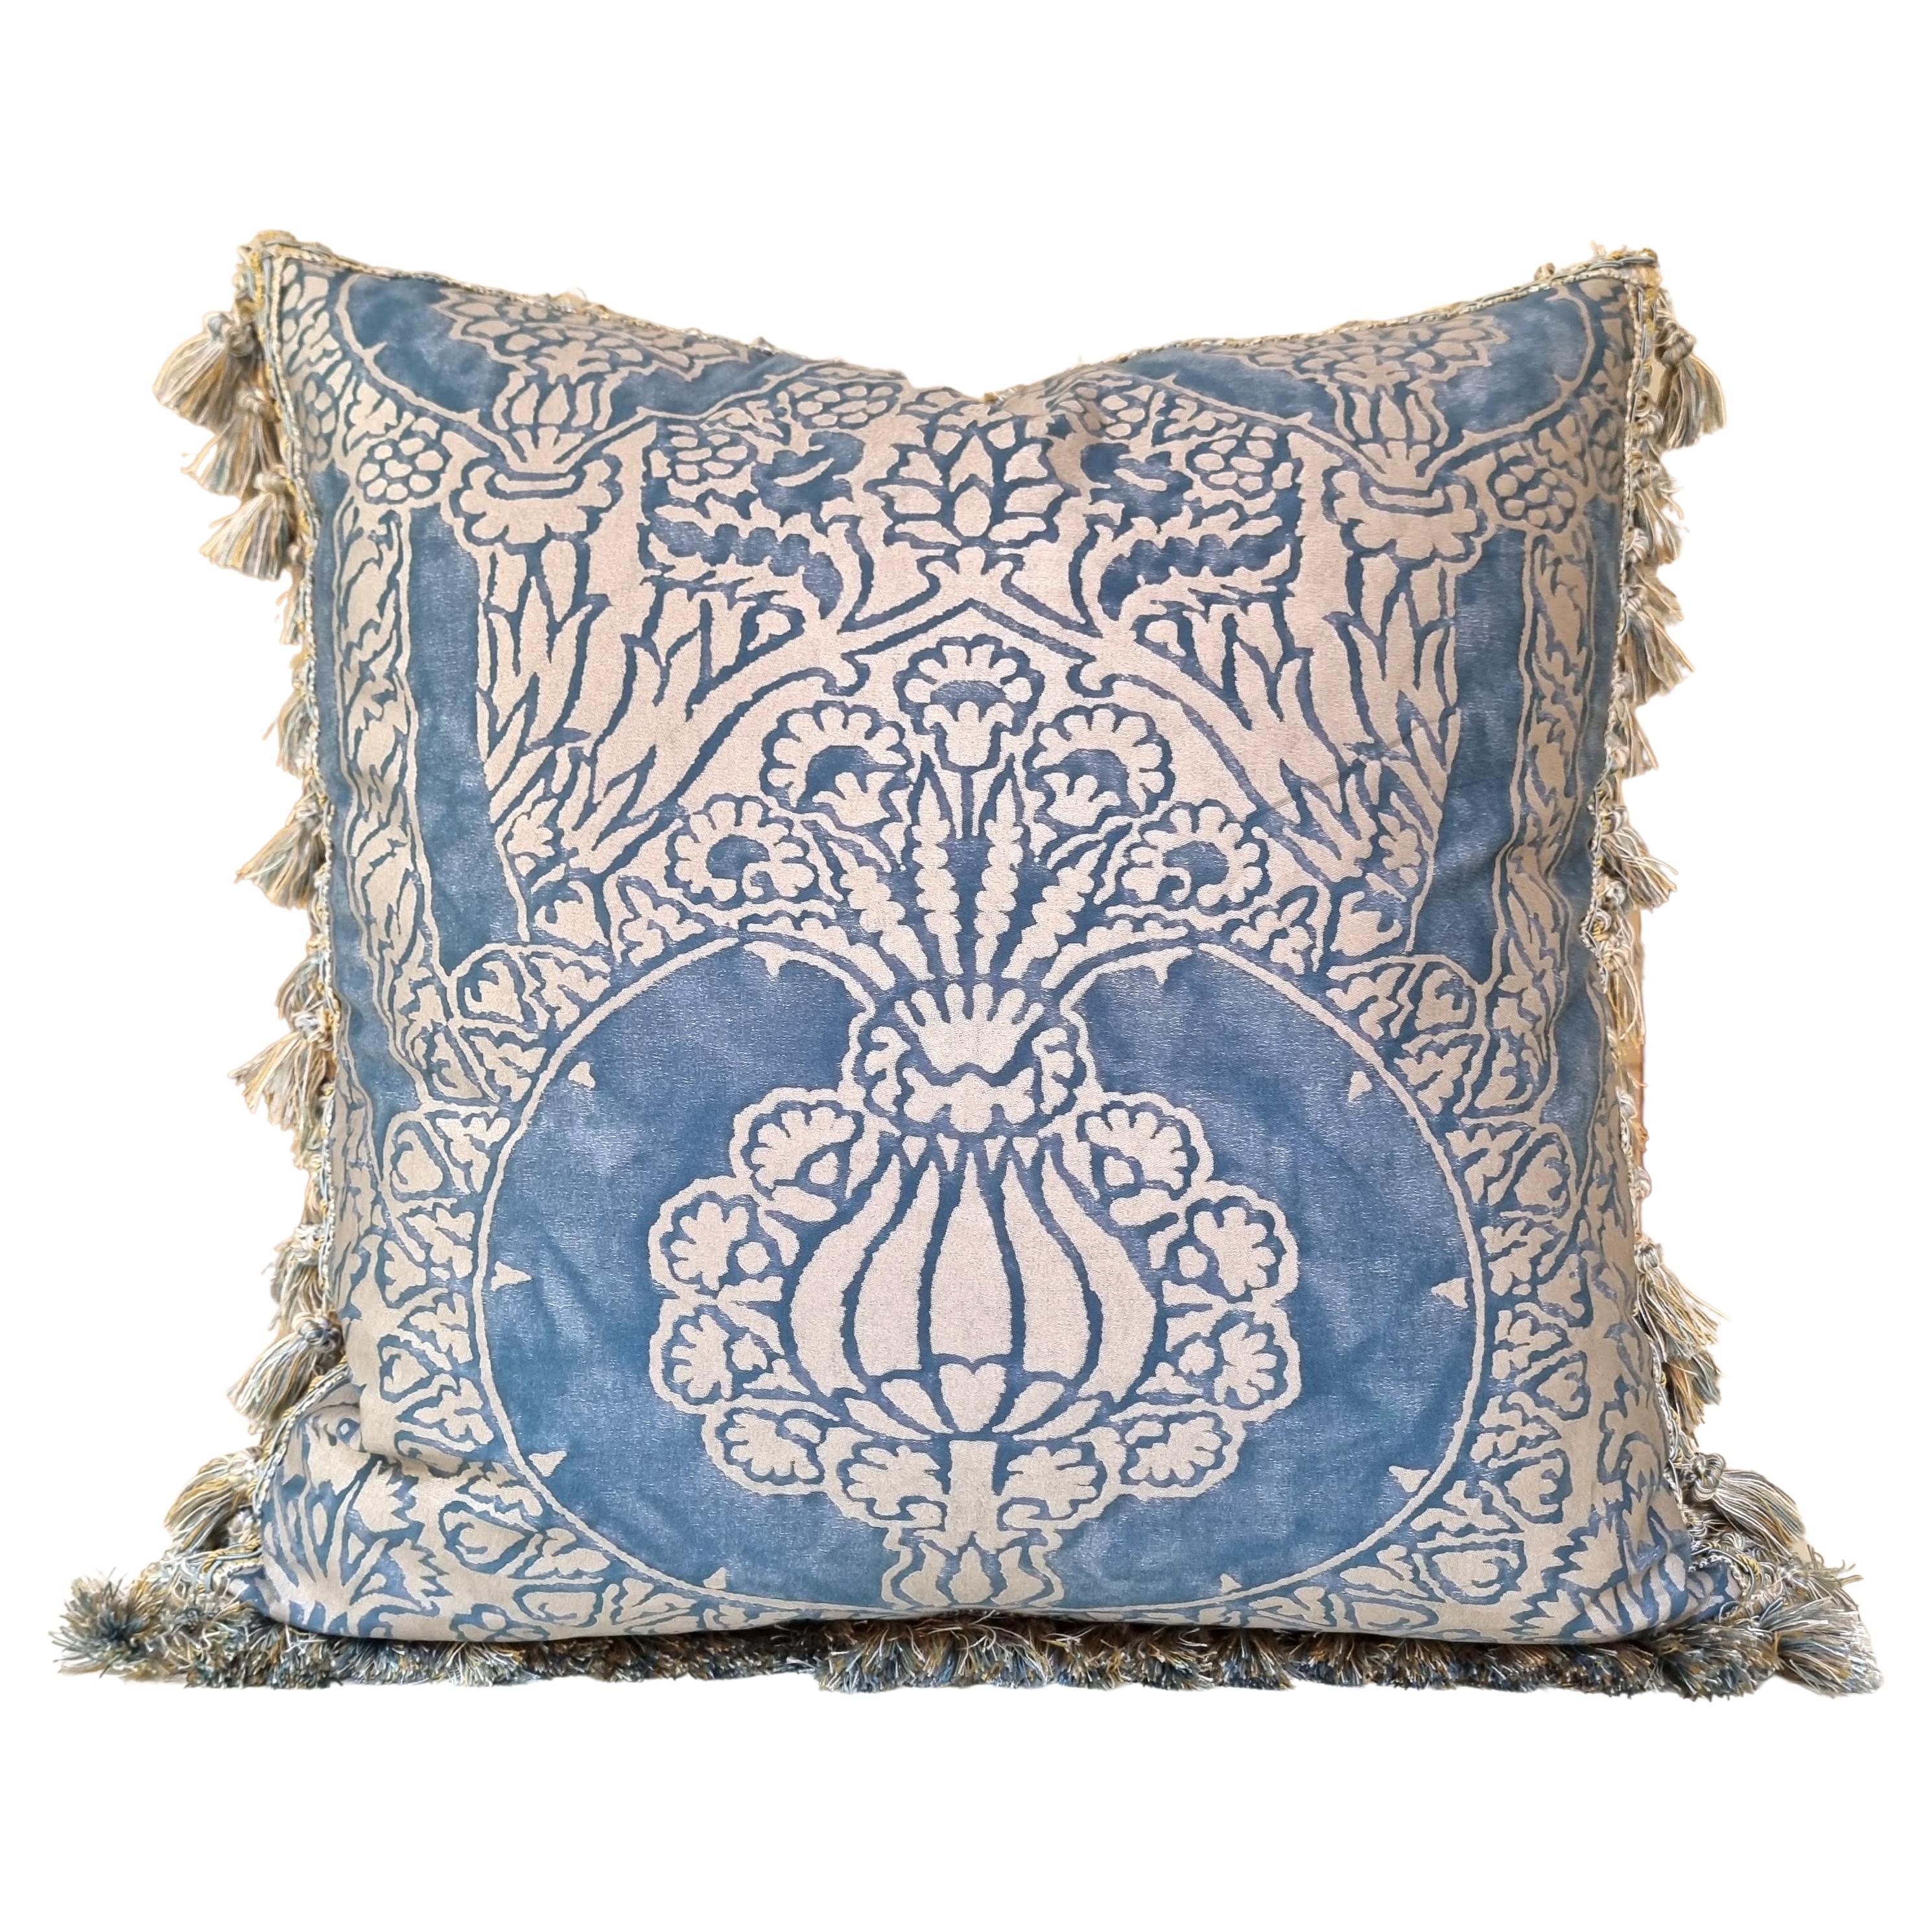 Double Sided Fortuny Fabric Pillow Tassel Trim Blue Silvery Gold Nicolo Pattern For Sale